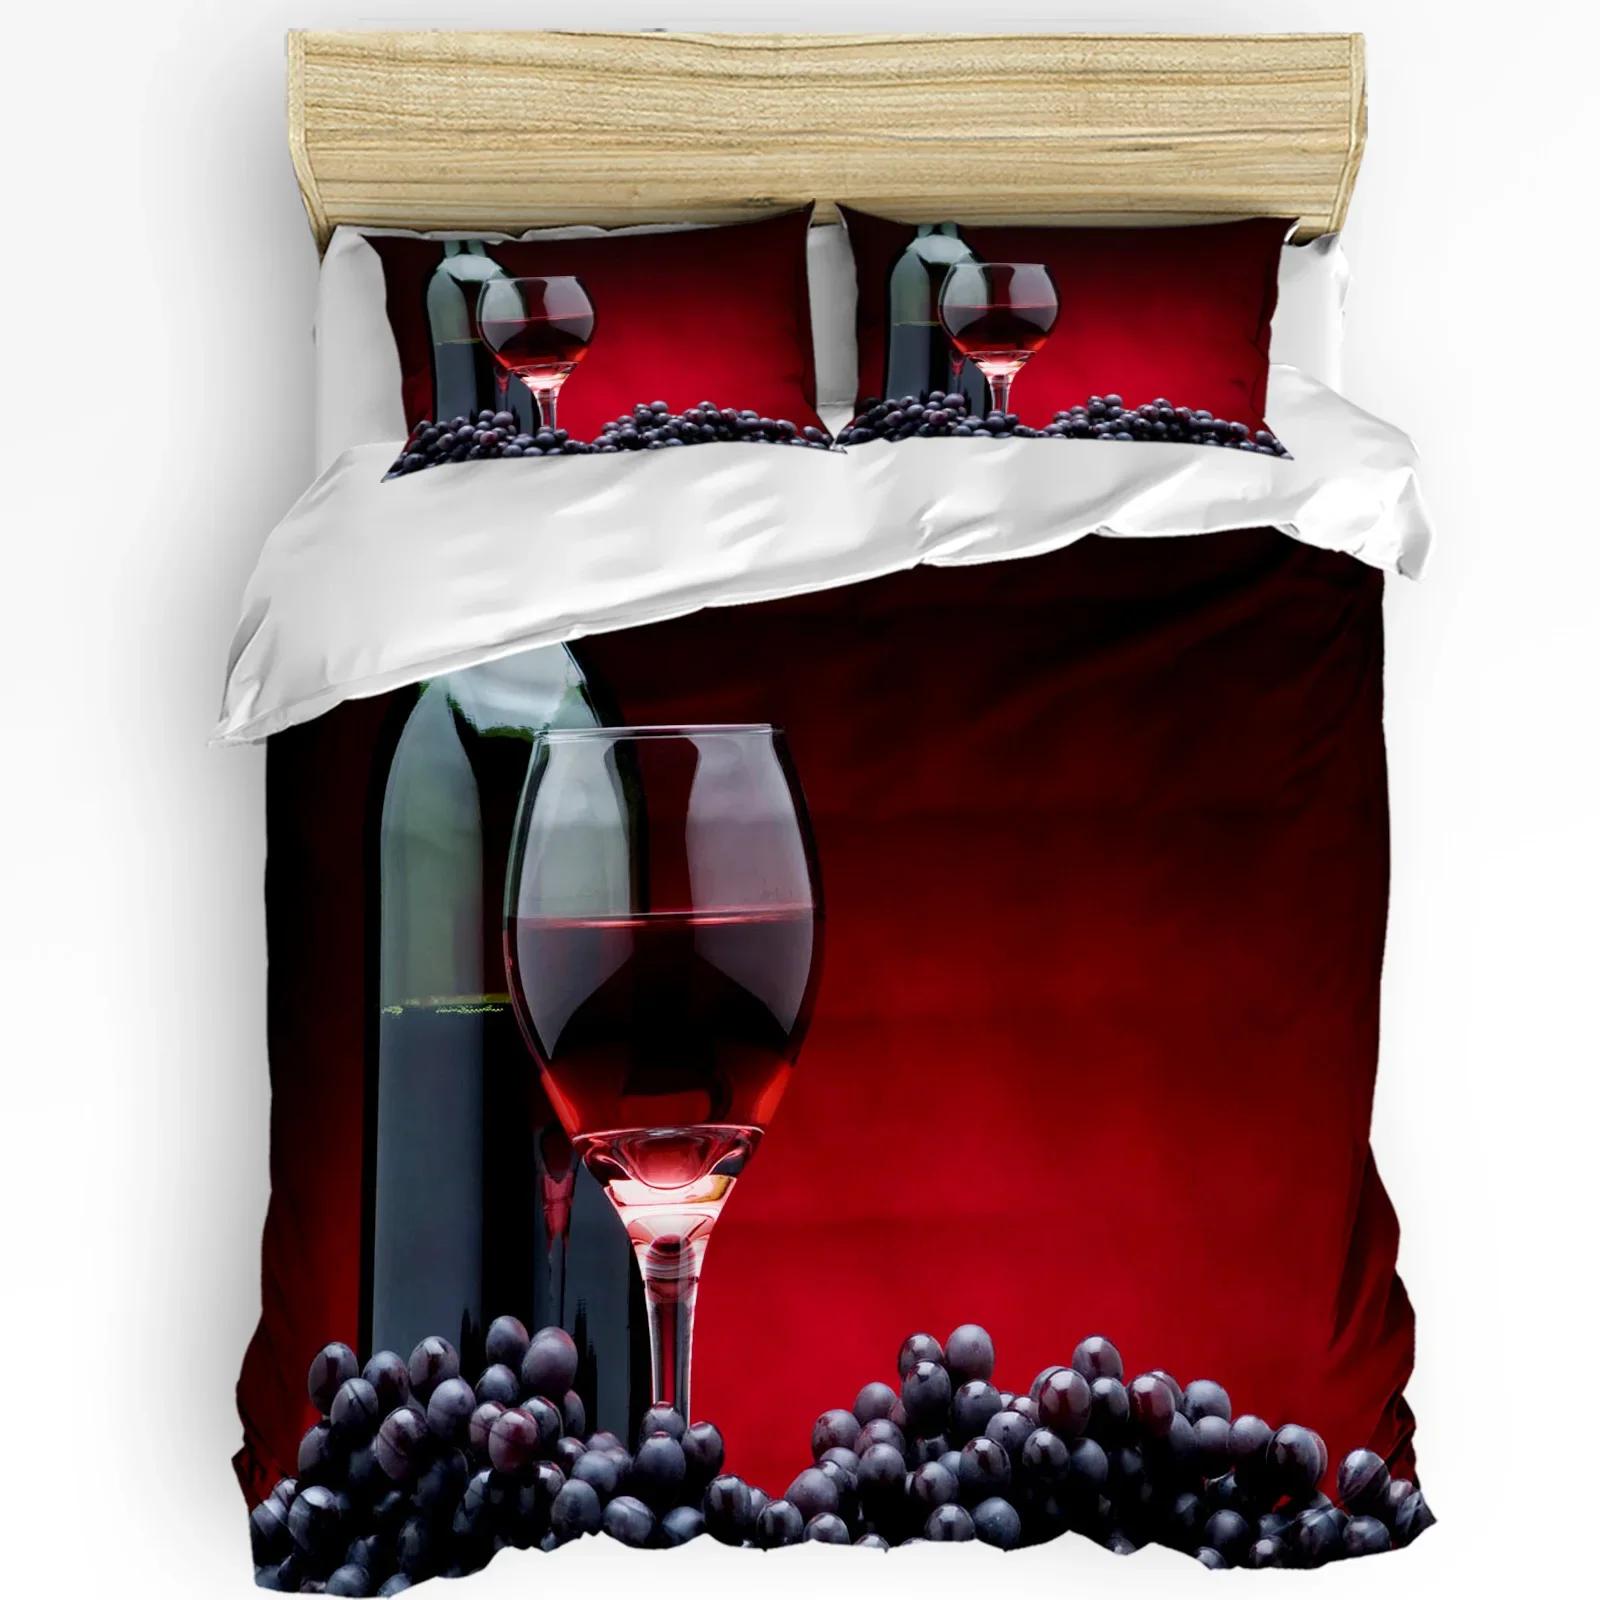 Red Wine Grape Fruit Printed Comfort Duvet Cover Pillow Case Home Textile Quilt Cover Boy Kid Teen Girl Luxury 3pcs